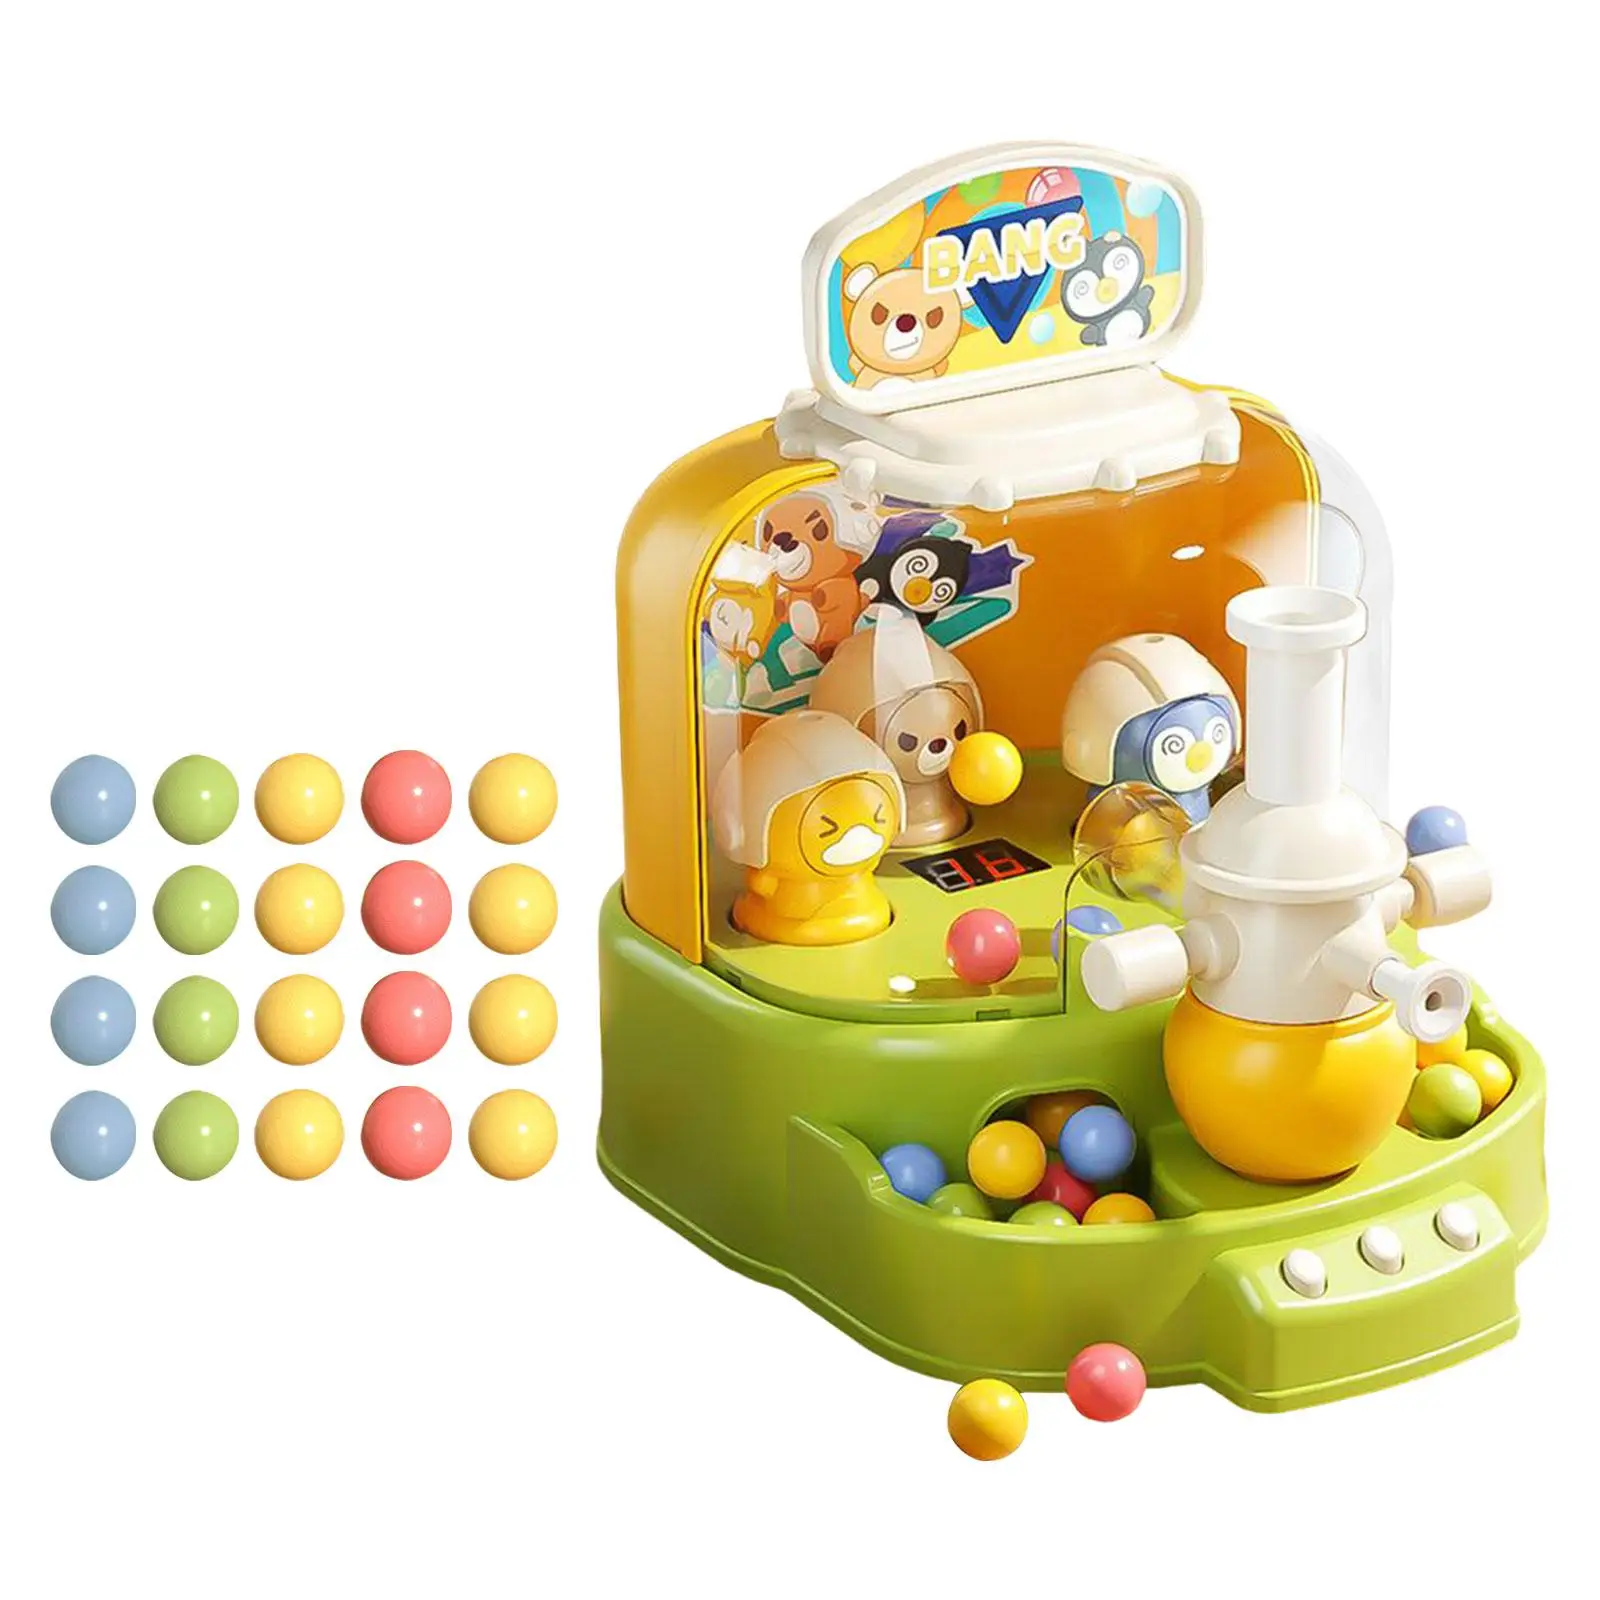 Target Games with Score Record, Party Toys with Light and Music, Kids Educational Toy, Developmental Toy for Kids 4 5 6